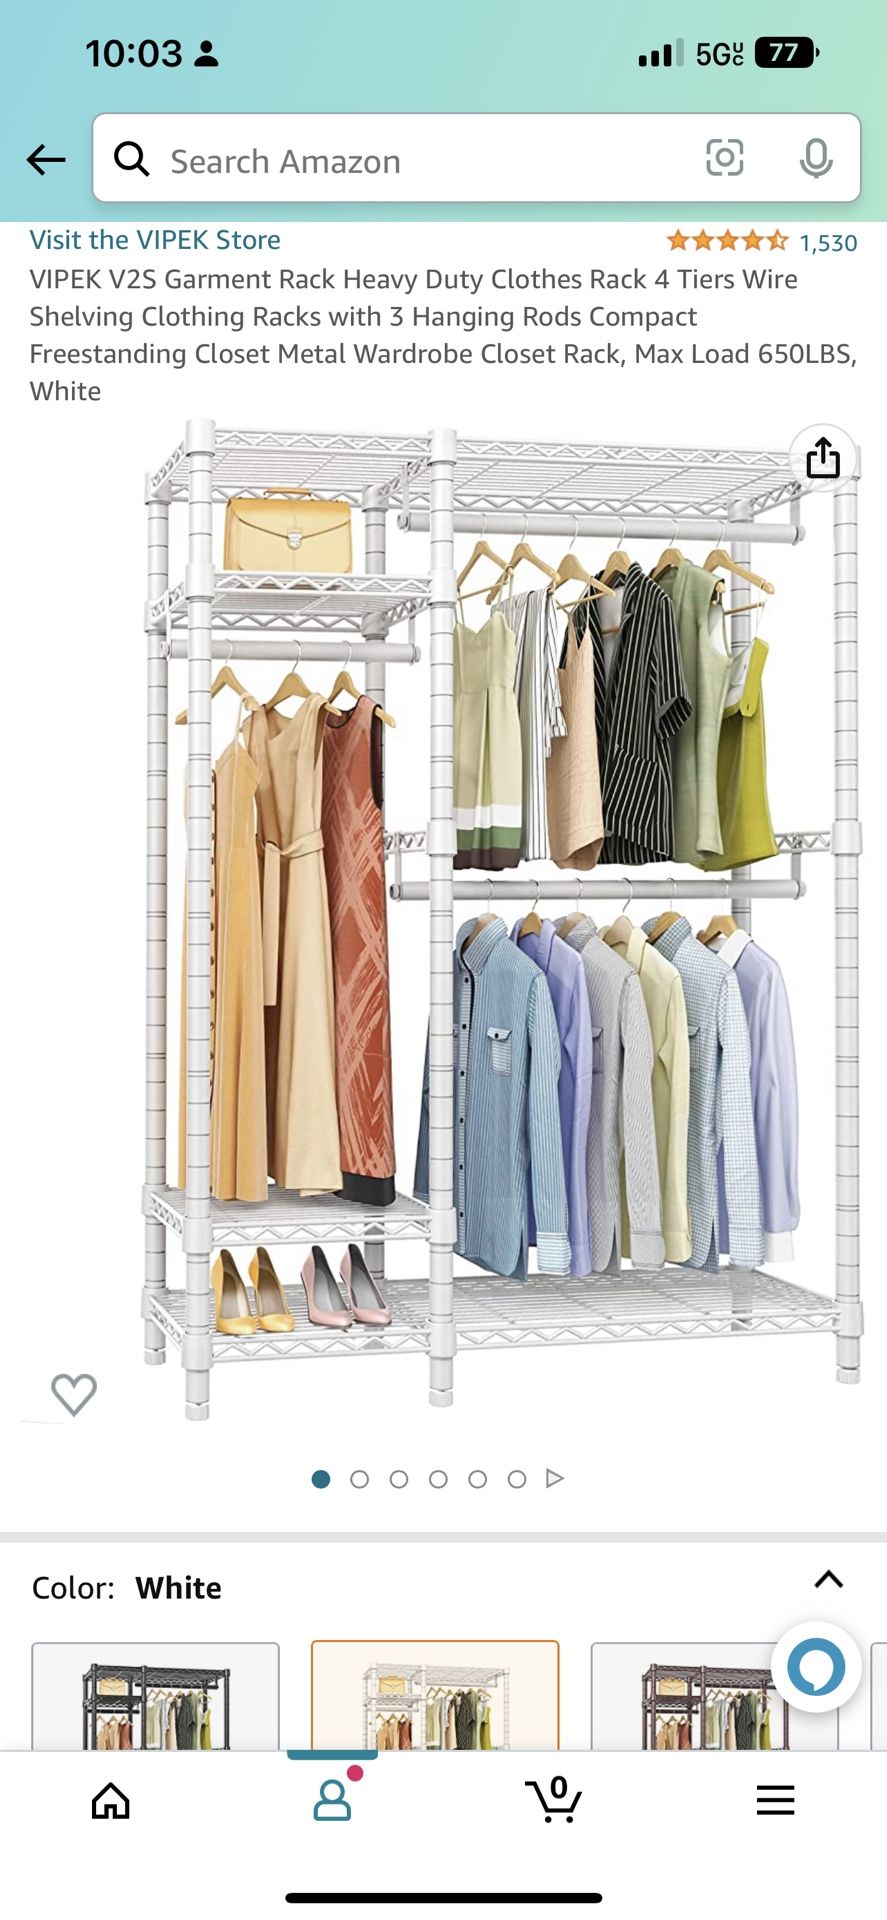 VIPEK V2S Garment Rack Heavy Duty Clothes Rack 4 Tiers Wire Shelving Clothing Racks with 3 Hanging Rods Compact Freestanding Closet Metal Wardrobe Clo